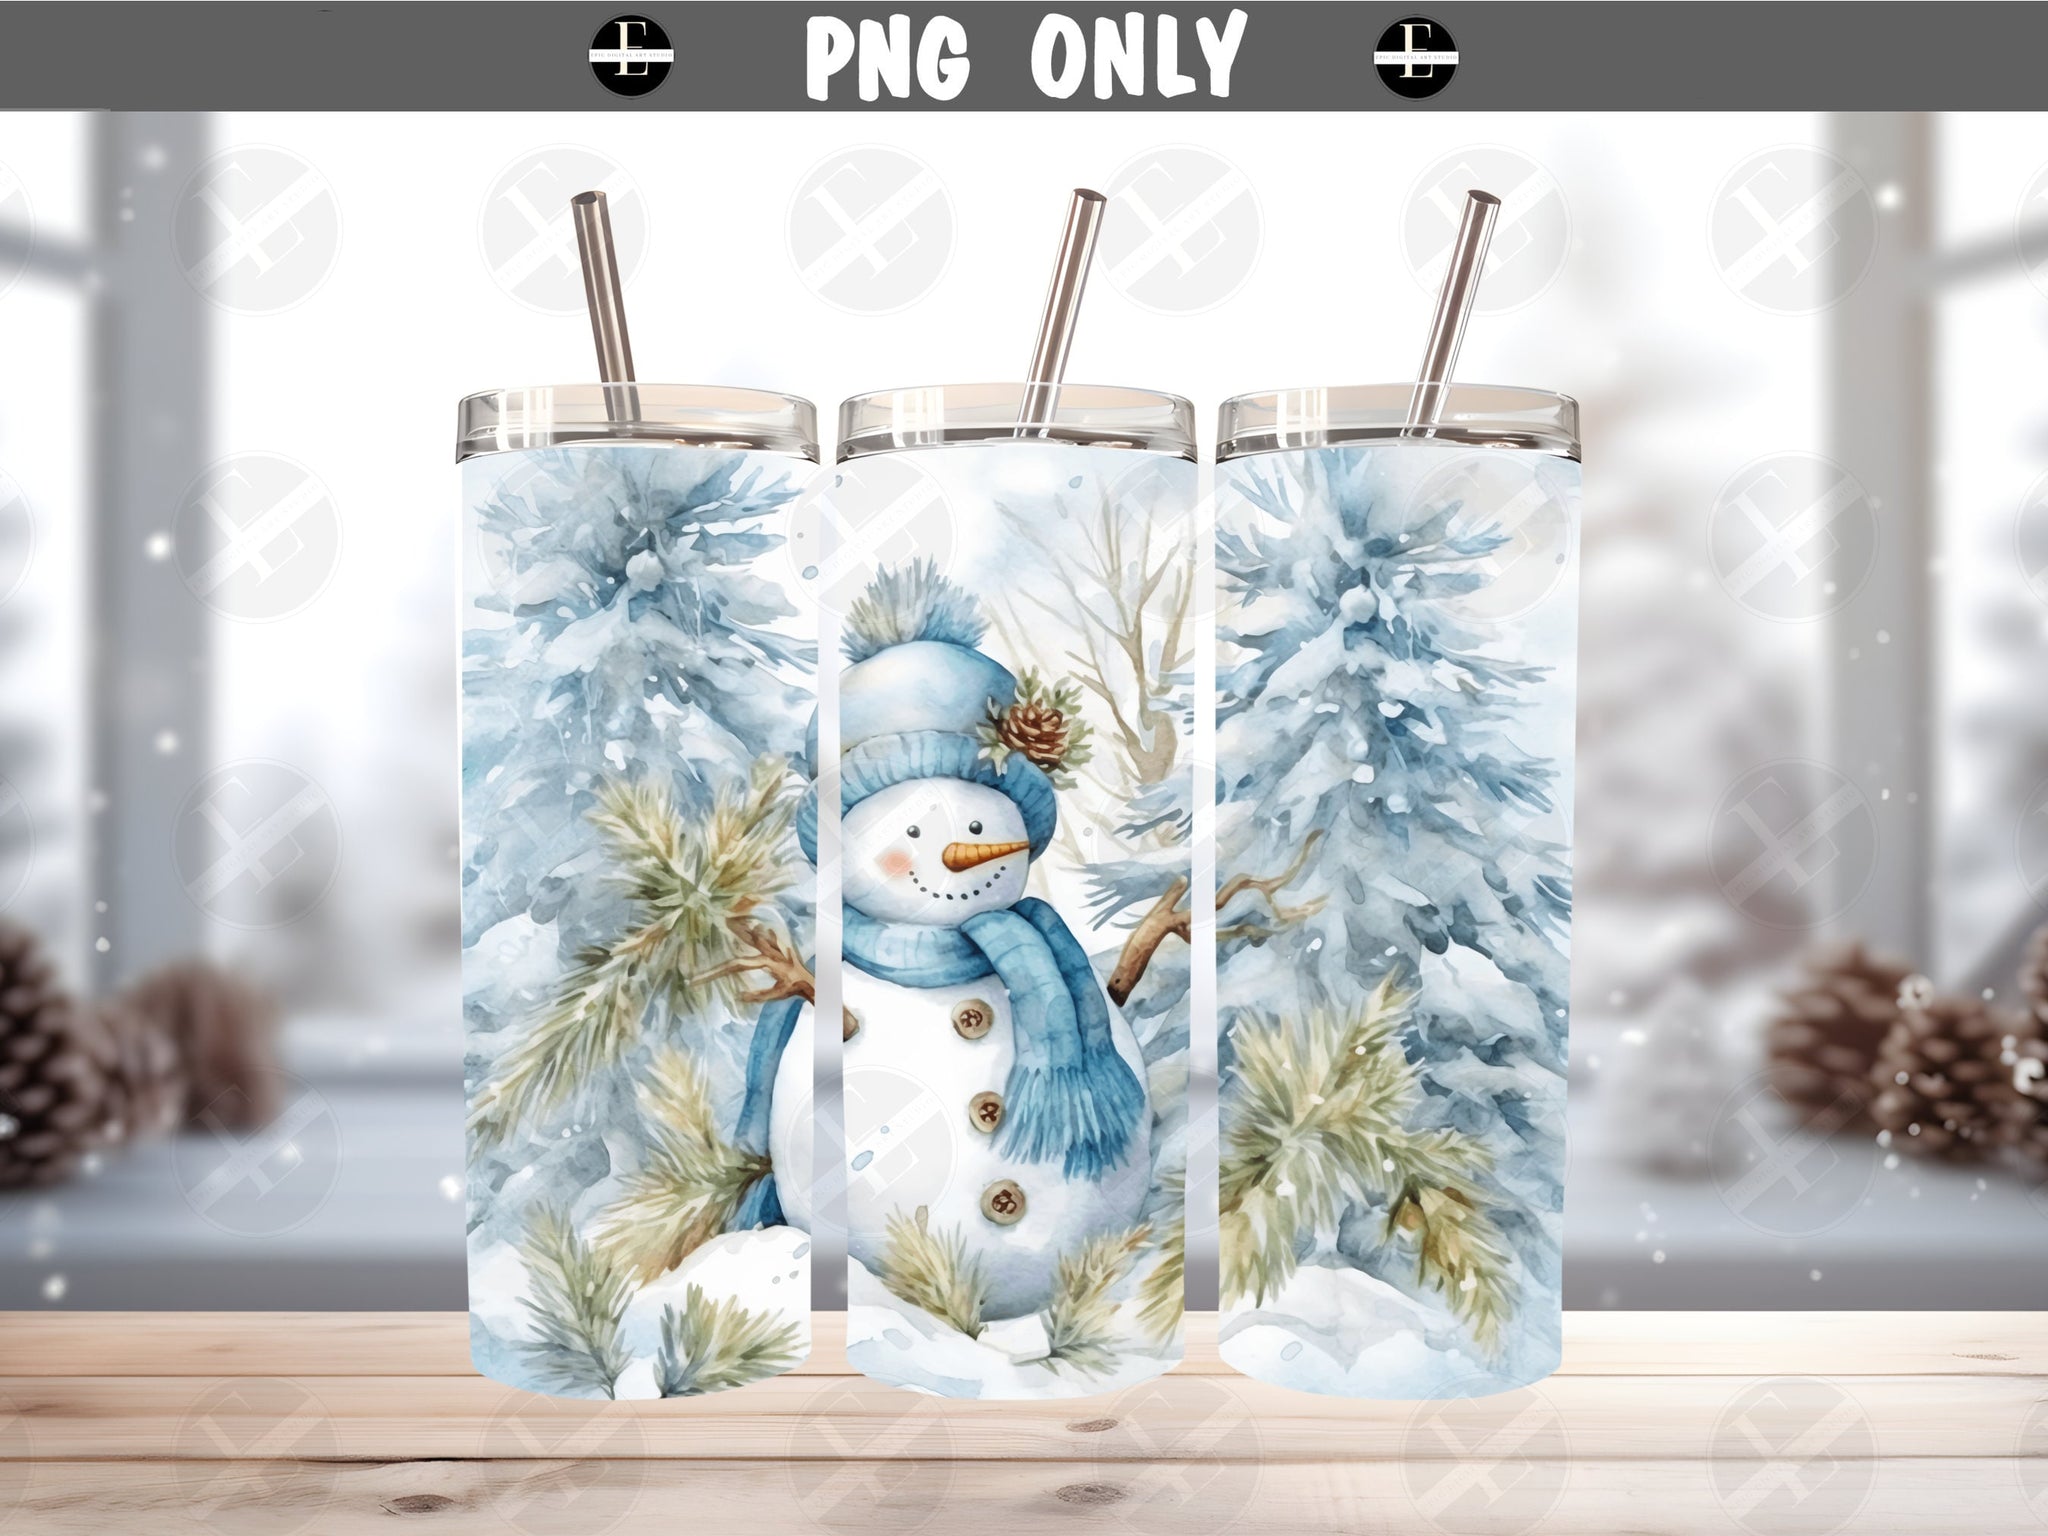 Snowman Skinny Tumbler Wrap Design - Christmas Tumbler Wraps - Ideal Tumbler Sublimation Designs Straight & Tapered - Instant Download